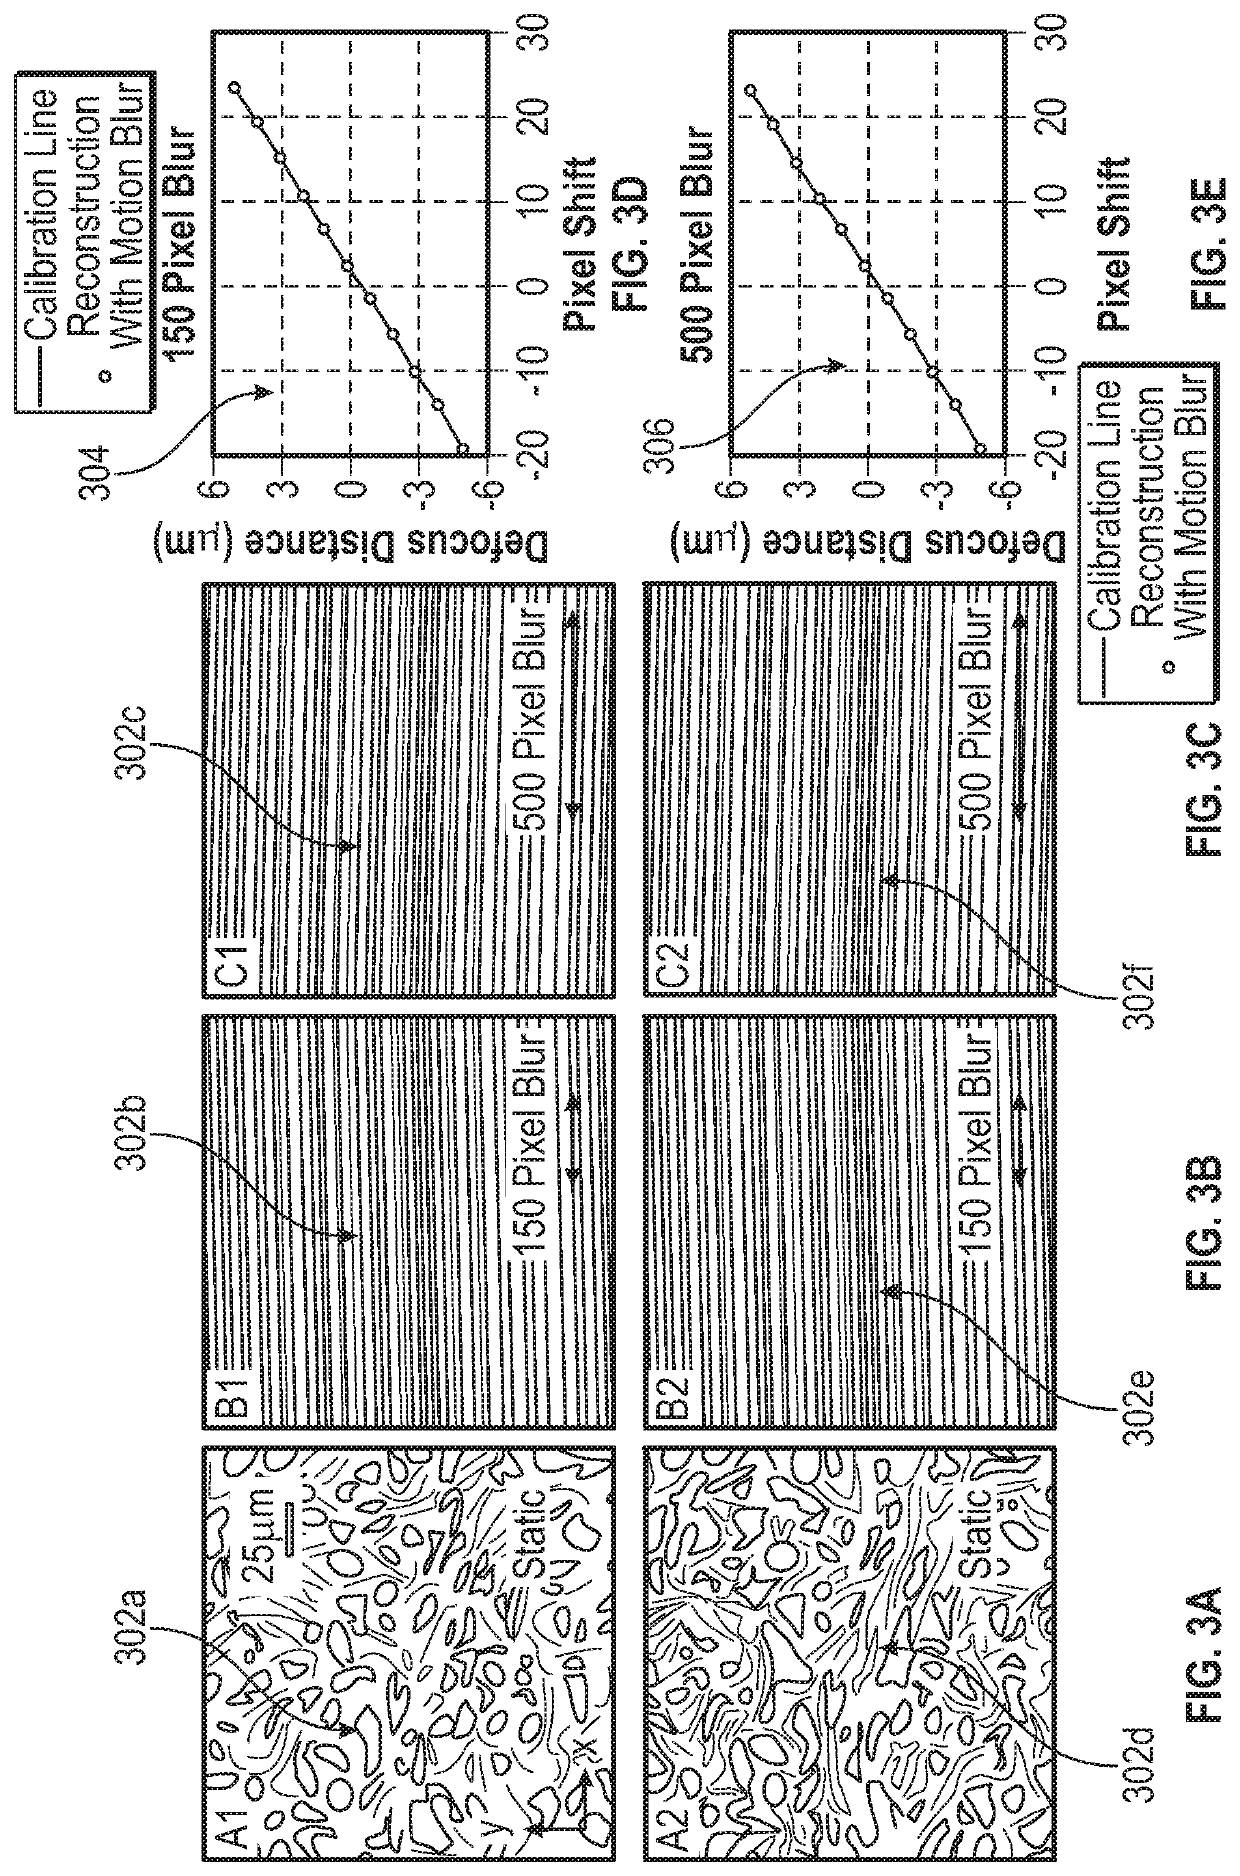 Methods and systems for single frame autofocusing based on color- multiplexed illumination